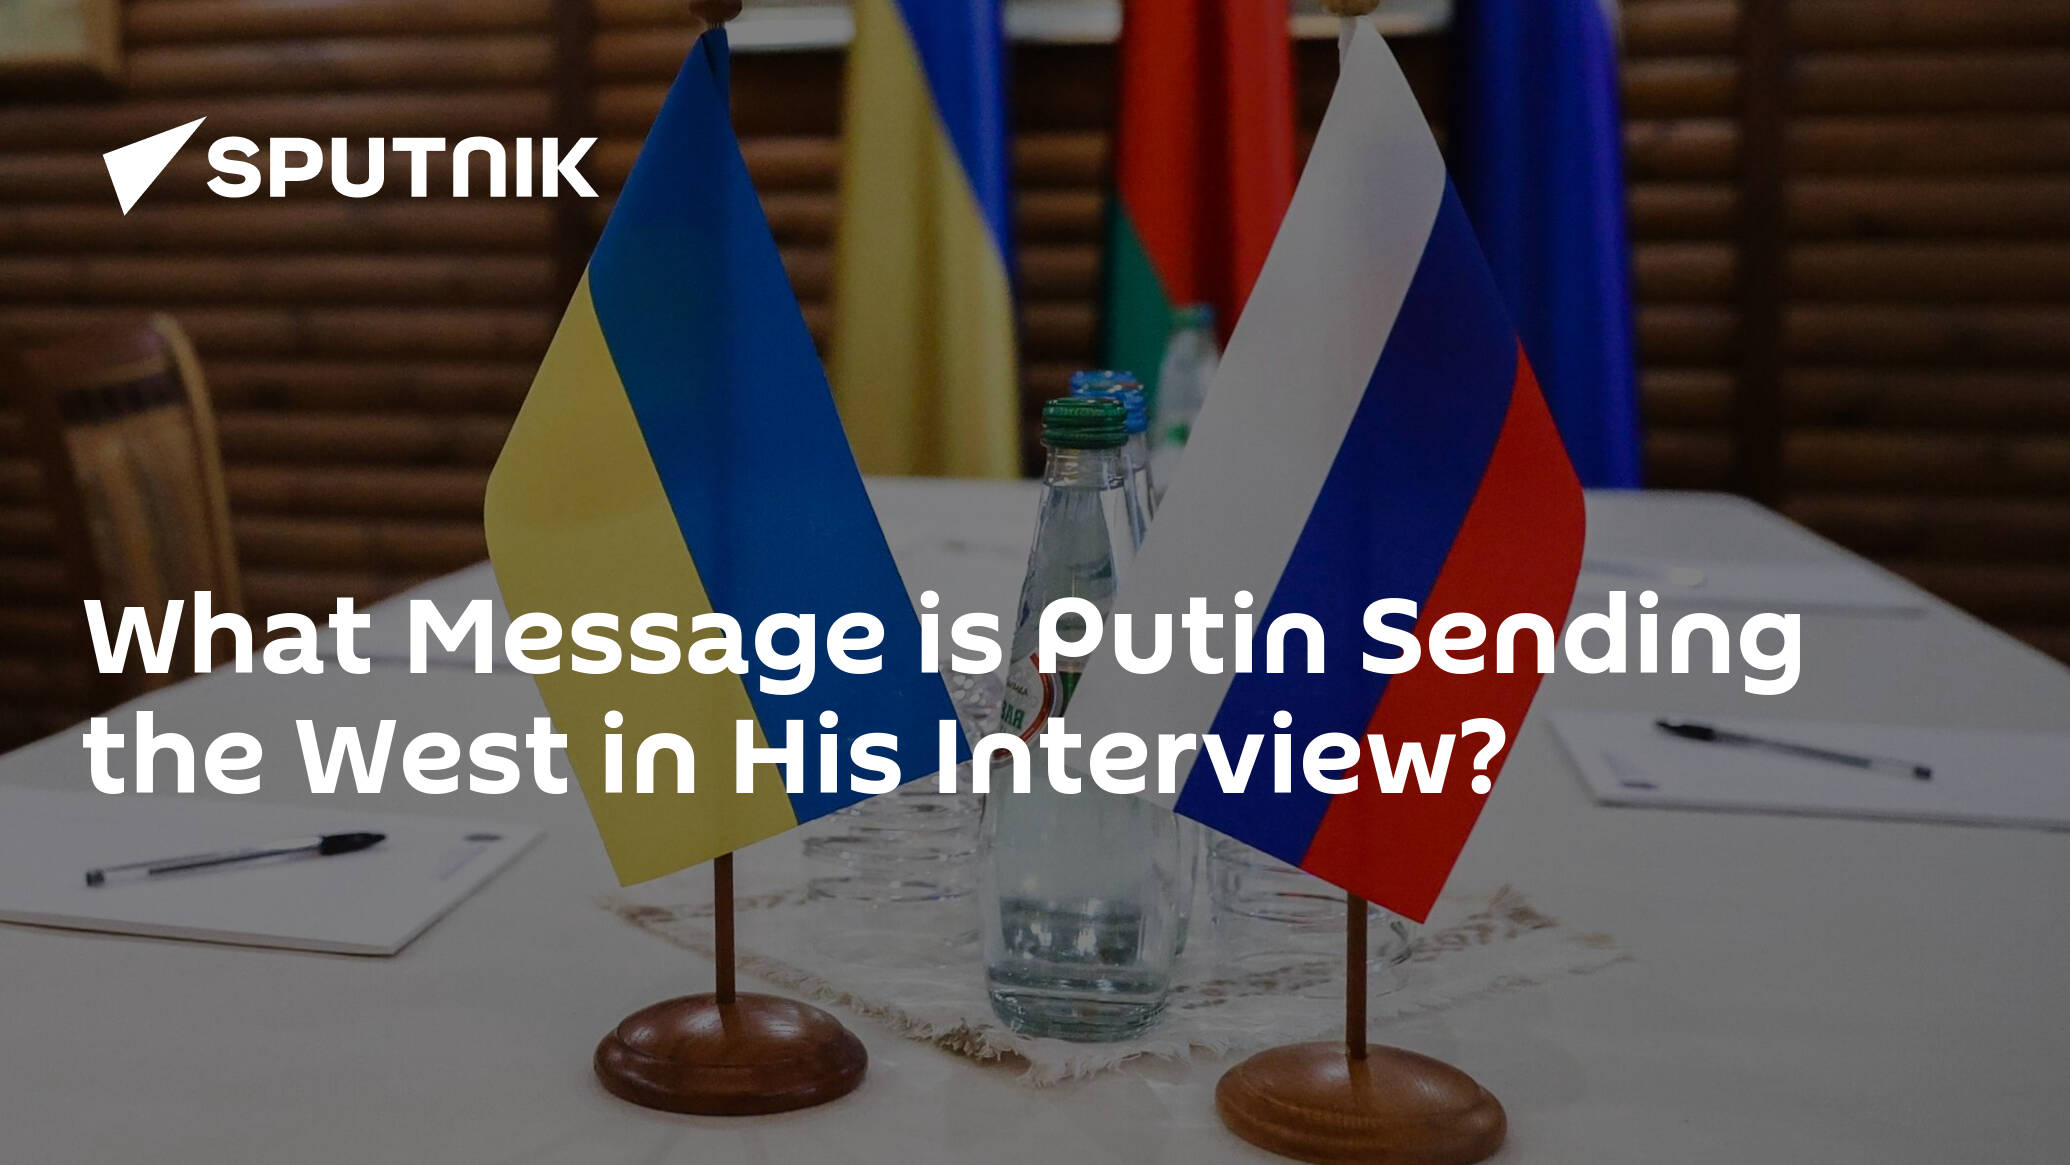 What Message is Putin Sending the West in His Interview?